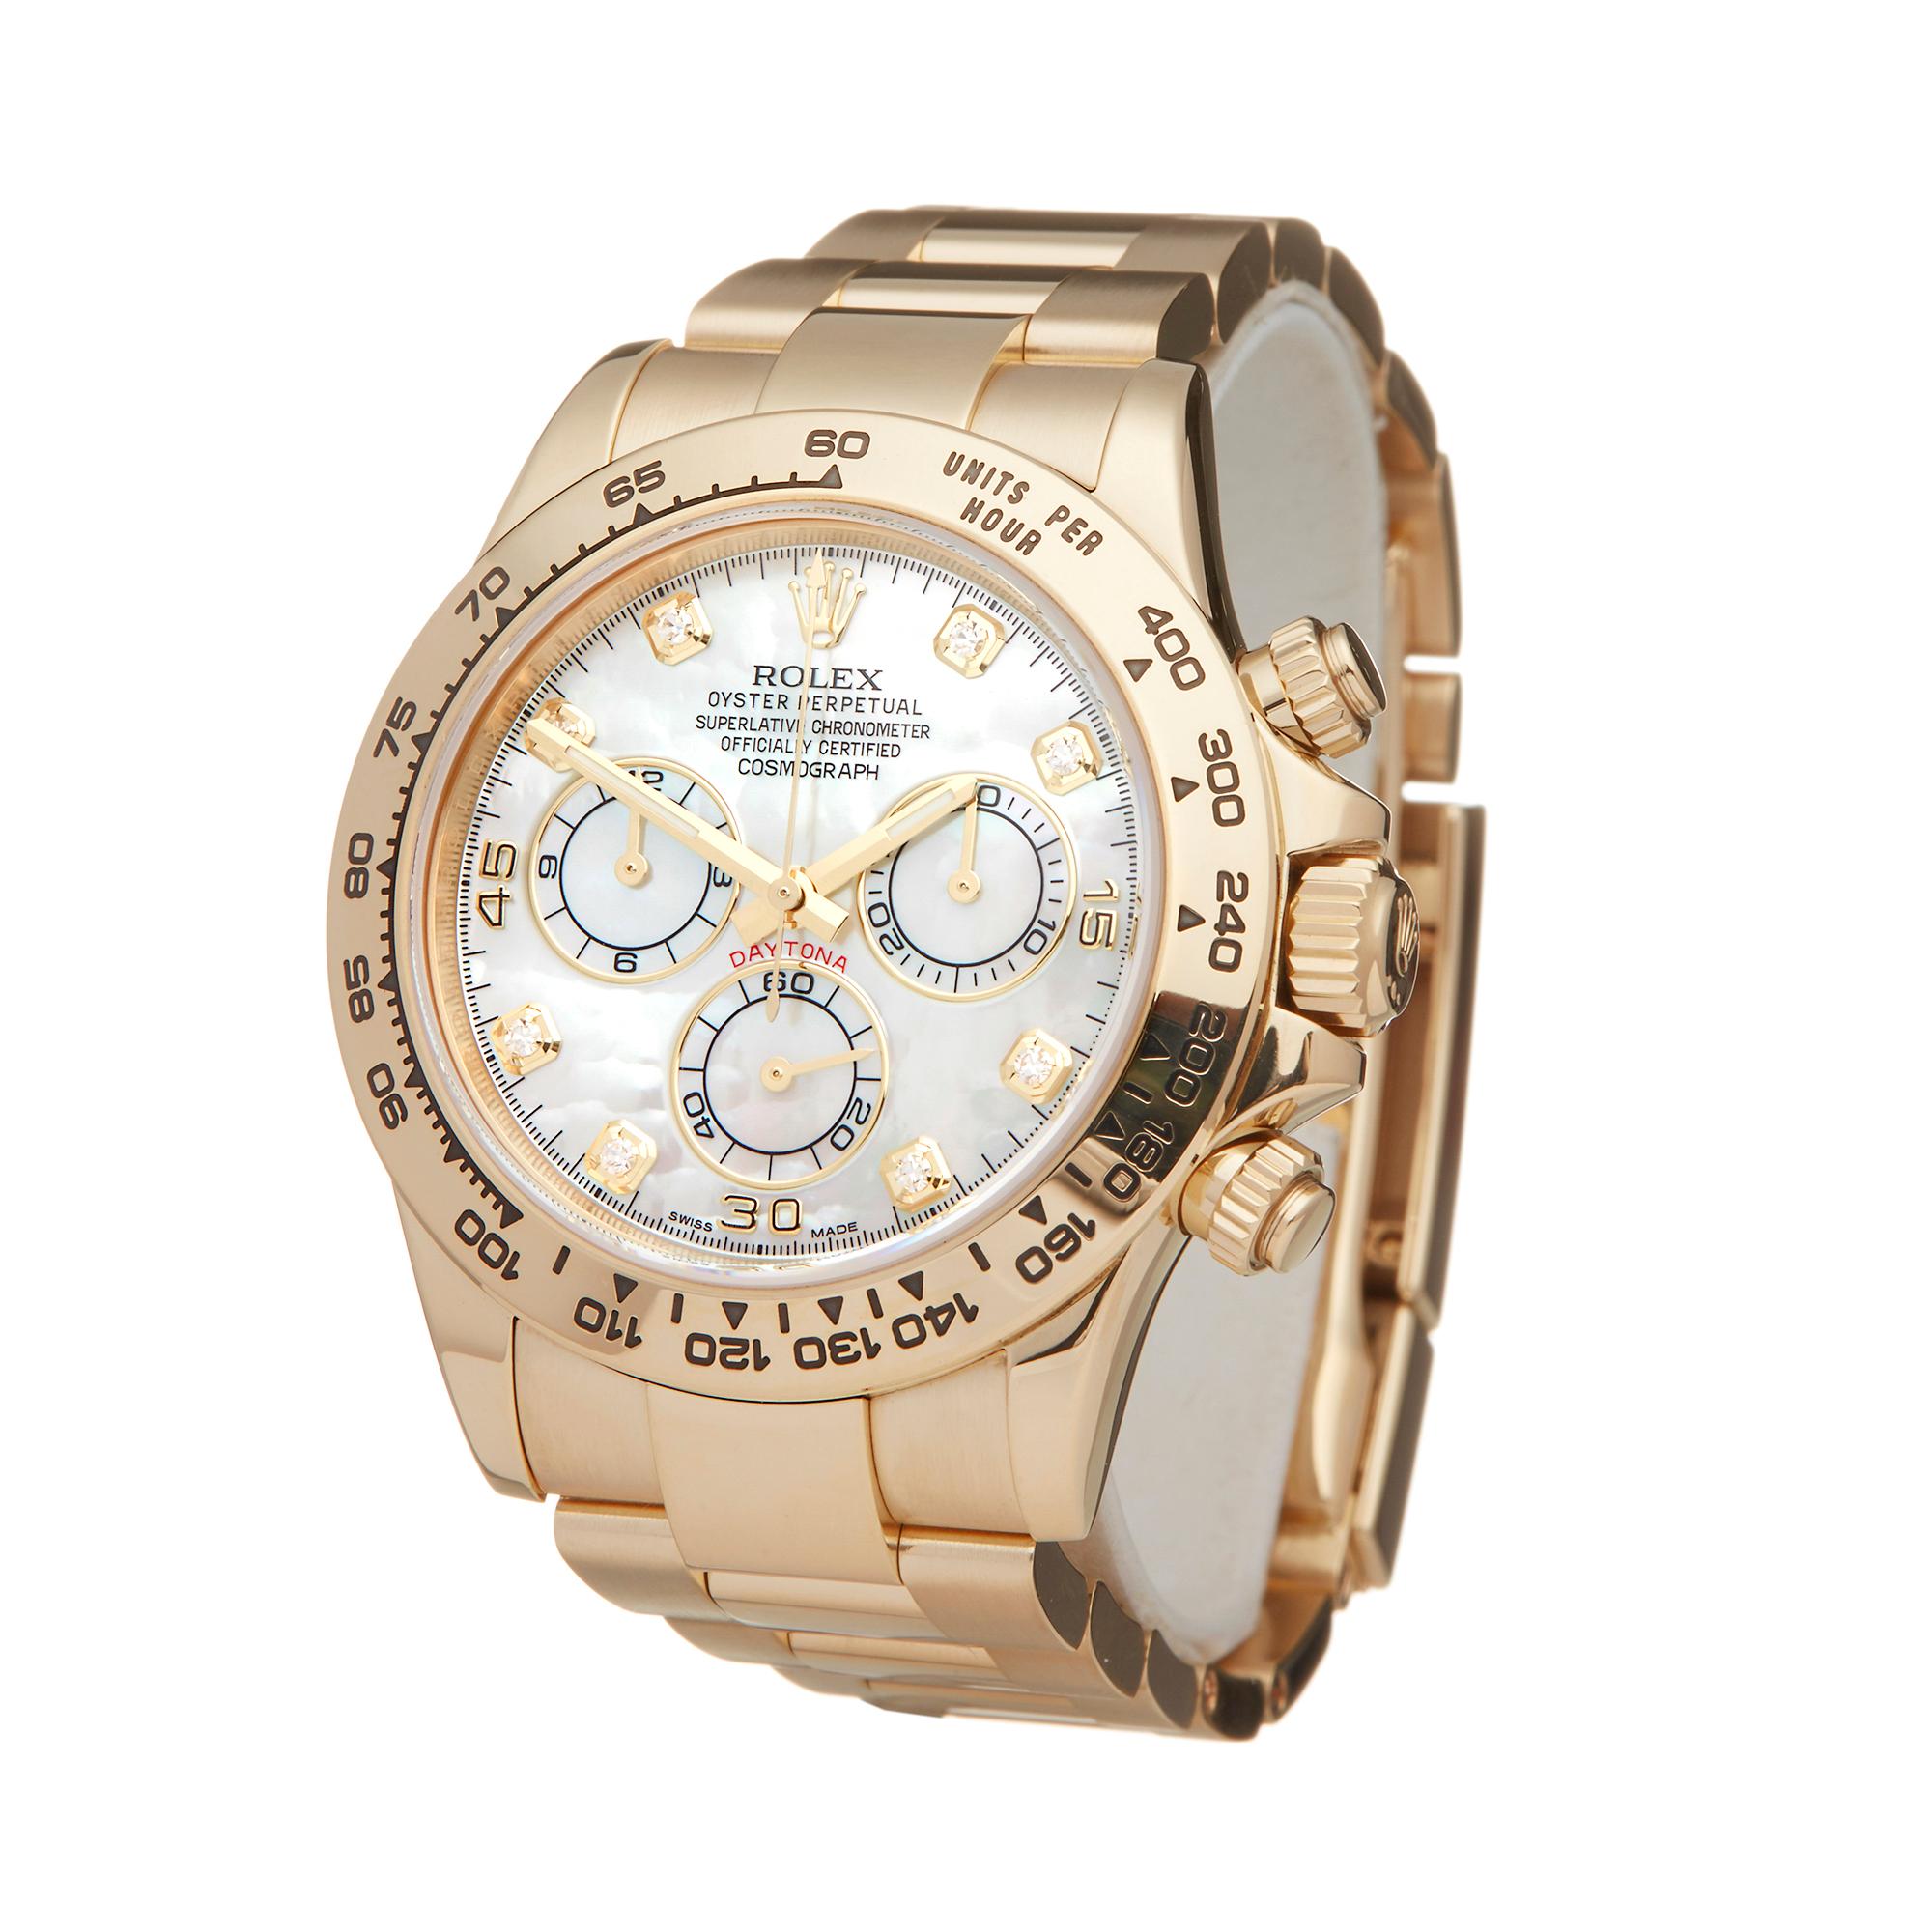 Reference: W6095
Manufacturer: Rolex
Model: Daytona
Model Reference: 116508
Age: 29th May 2018
Gender: Men's
Box and Papers: Box, Manuals and Guarantee
Dial: Mother Of Pearl Diamond
Glass: Sapphire Crystal
Movement: Automatic
Water Resistance: To